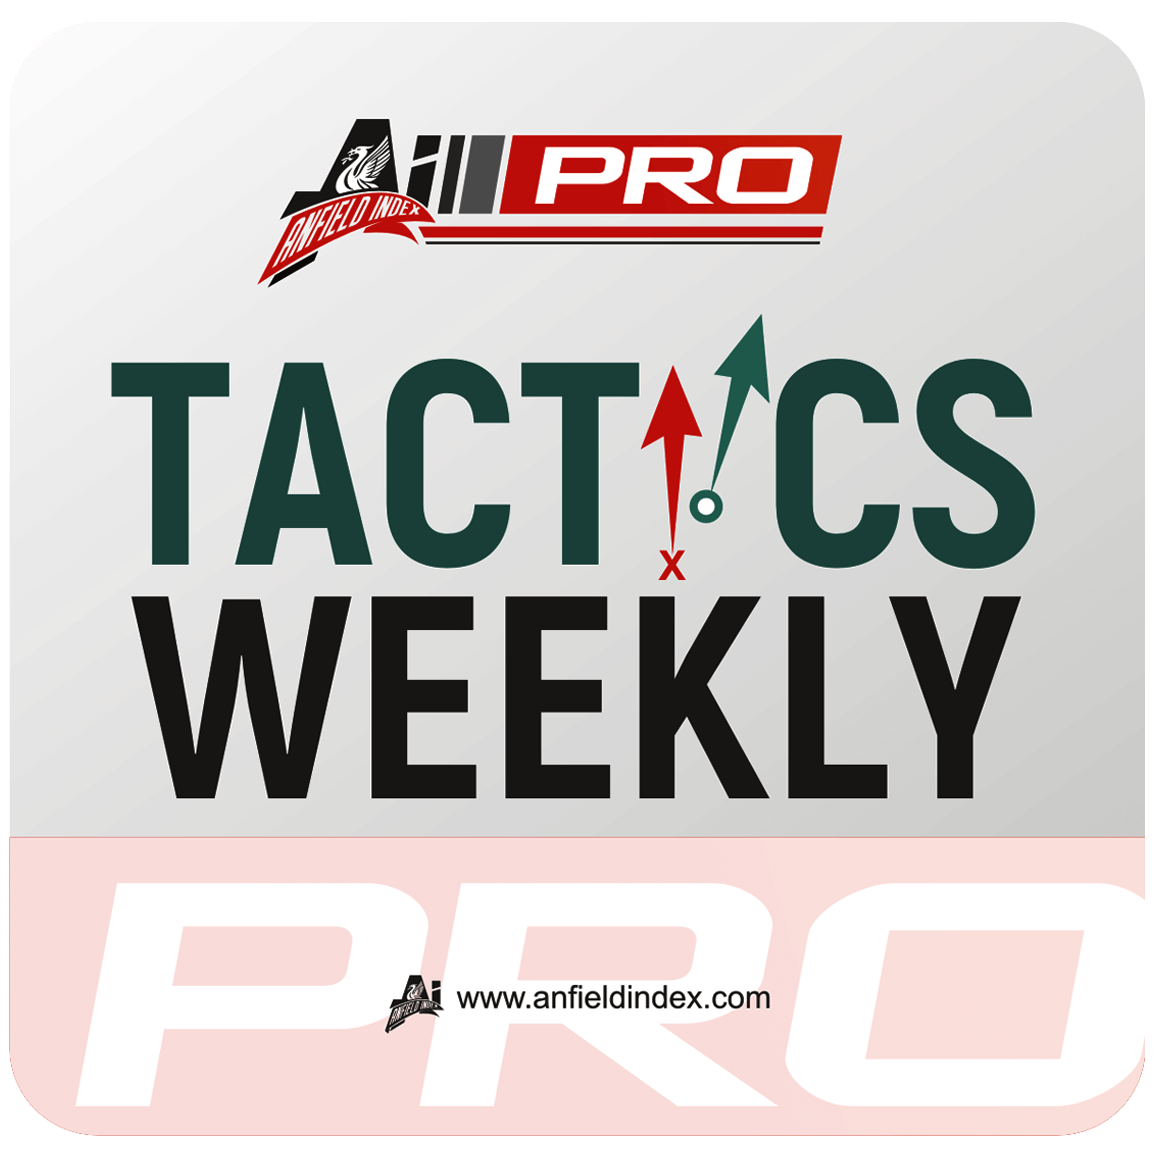 Tactics Weekly: Special Preview Edition